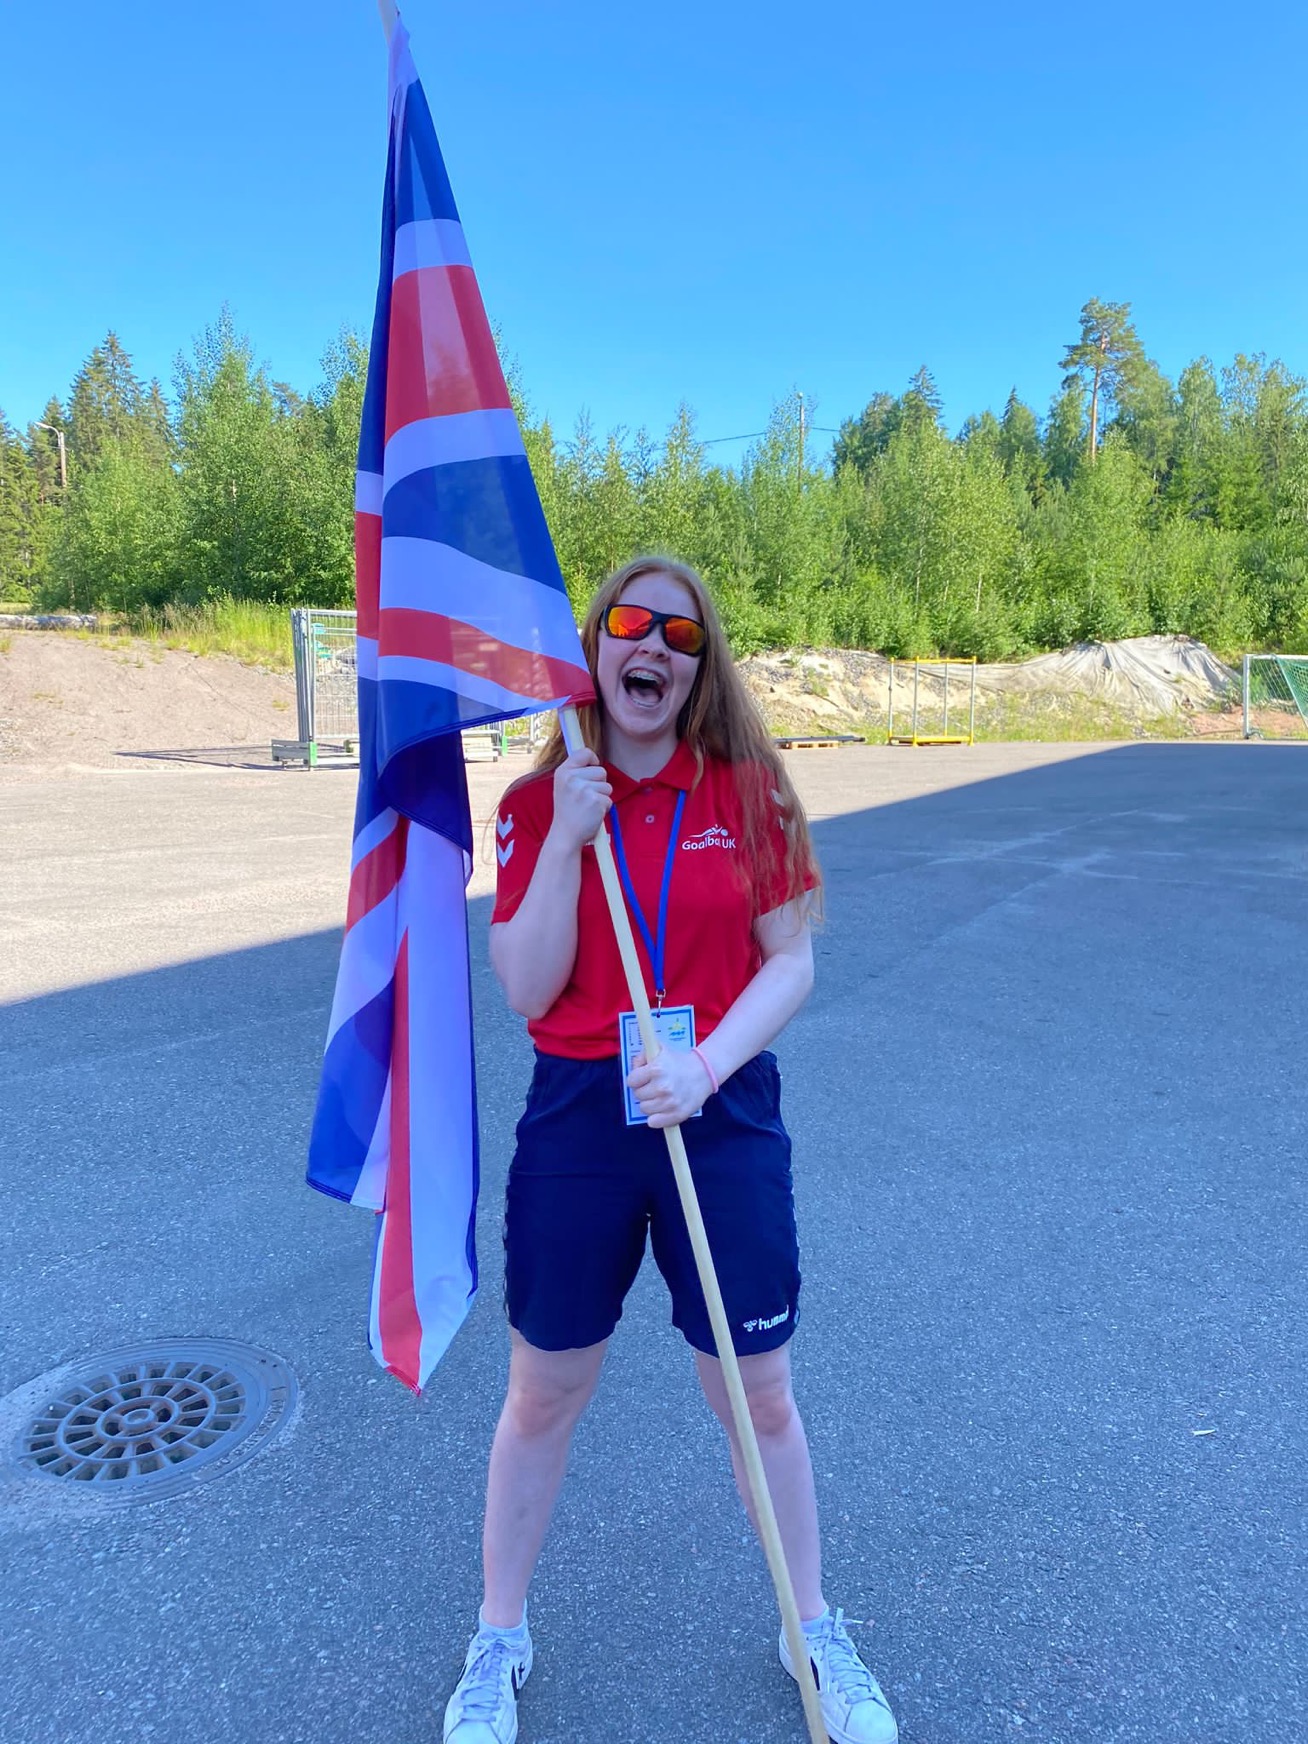 Chelsea holding a Union Jack flag and grinning for the camera